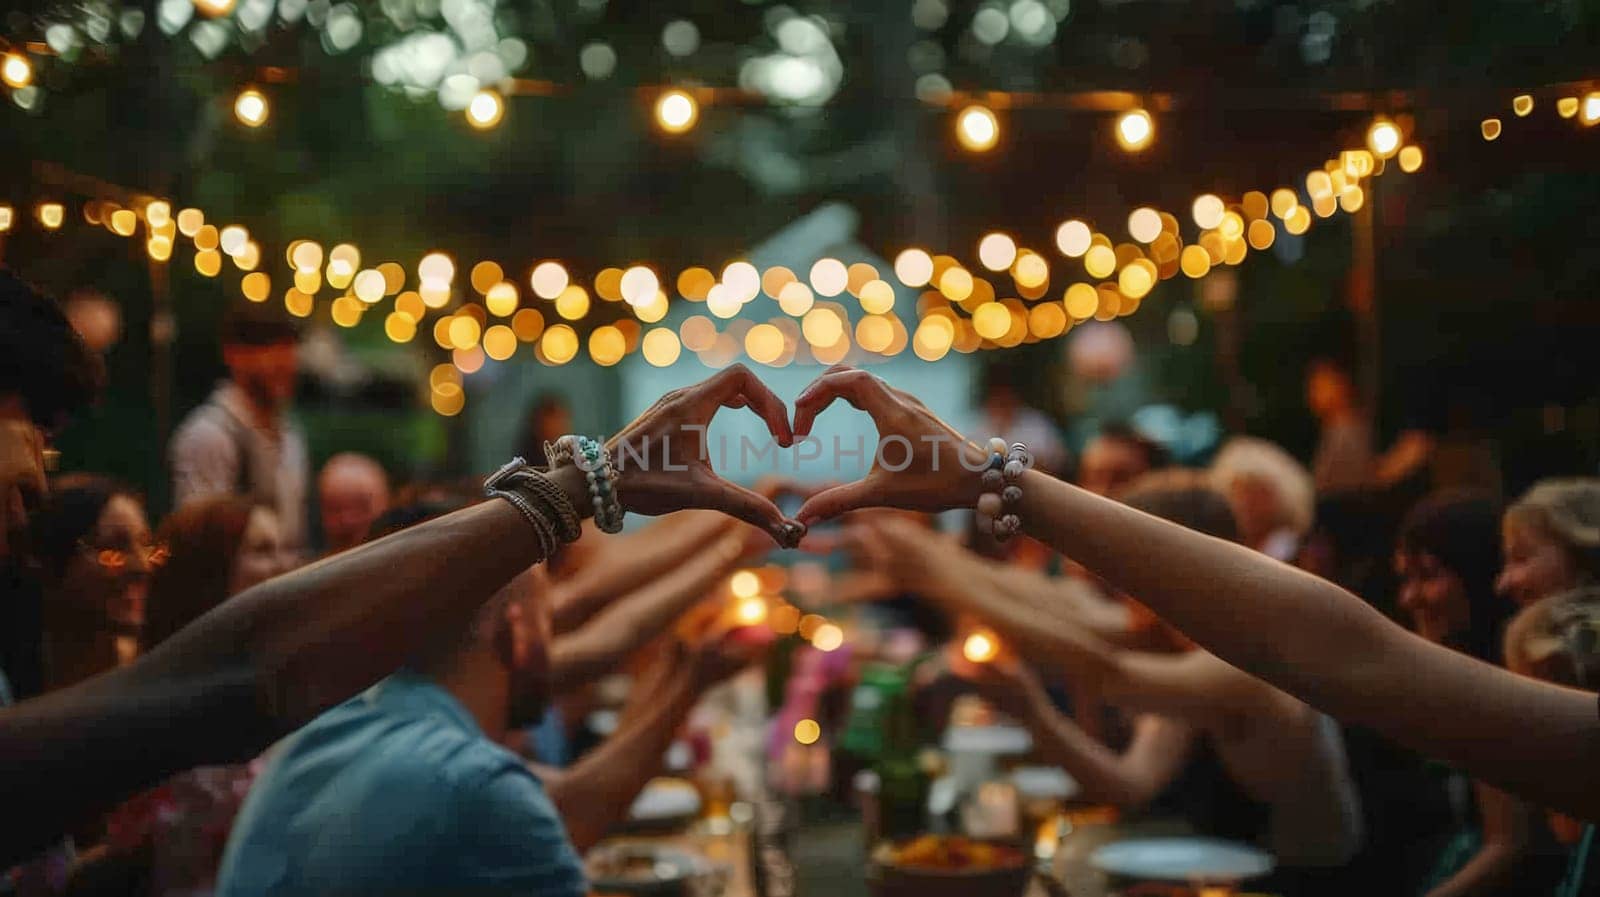 hand make heart, Diverse Multicultural Friends and Family at an Outdoors Garden Party.